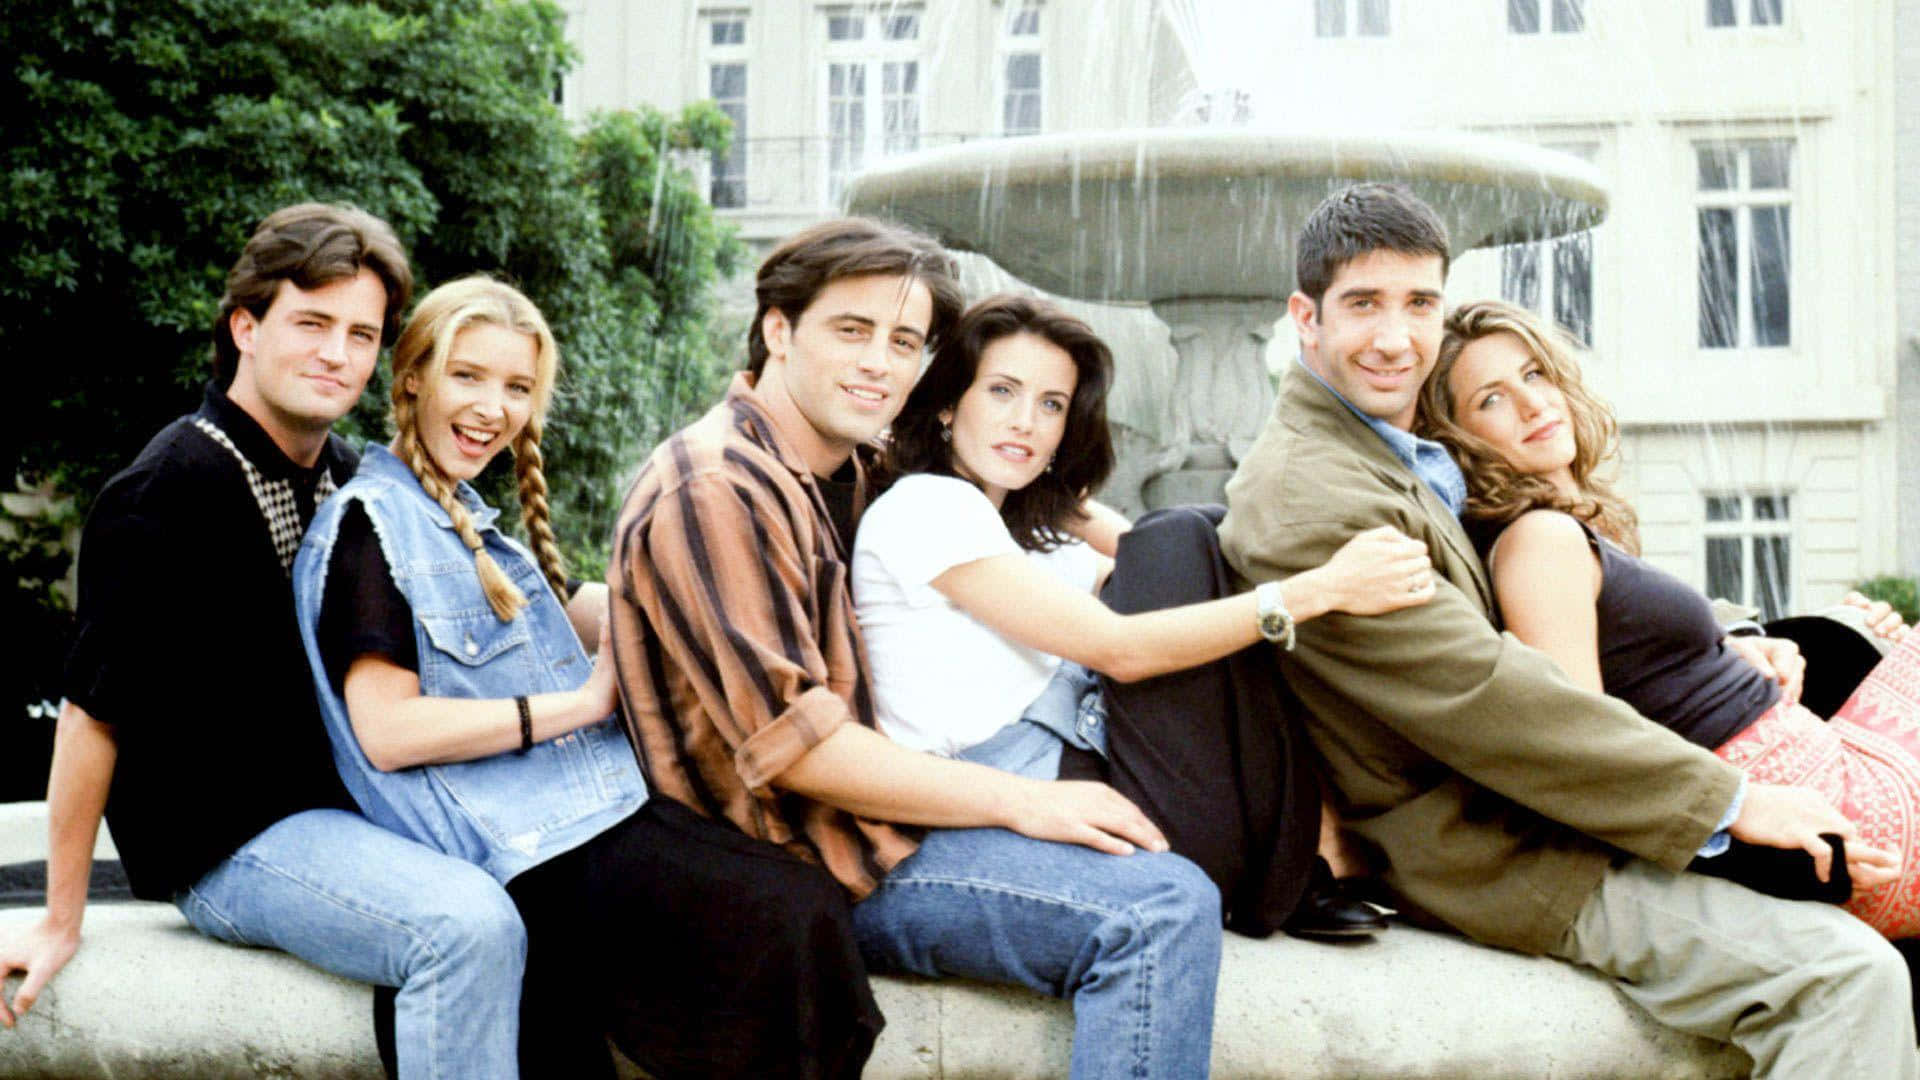 "Where Ross, Rachel, Phoebe, Monica, Joey and Chandler have lived since 1994"